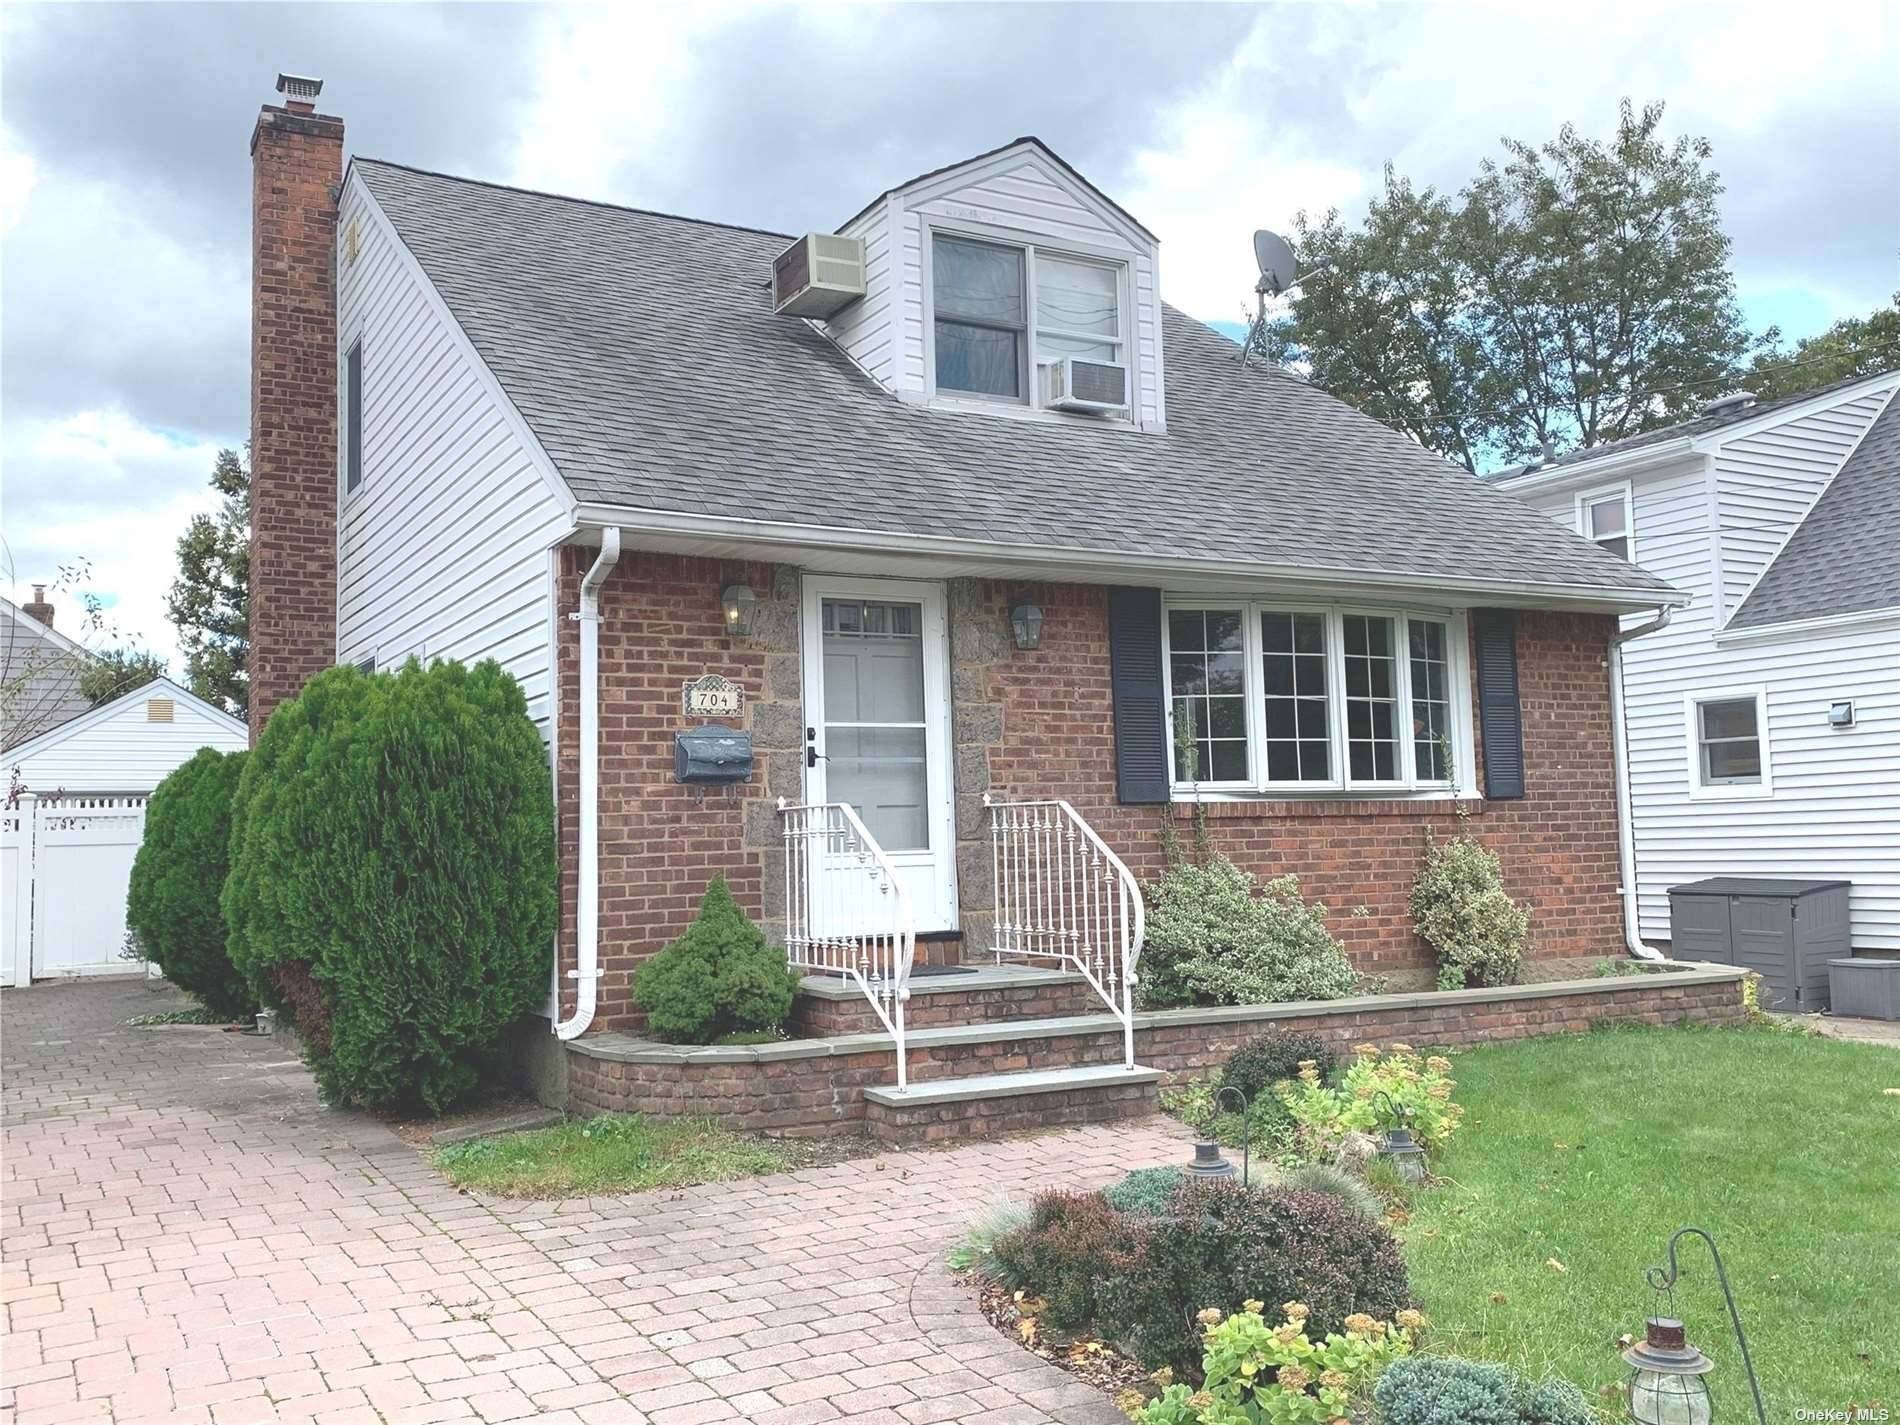 Lovely 3 Bedroom Colonial, Located In New Hyde Park Village on a Great Block.